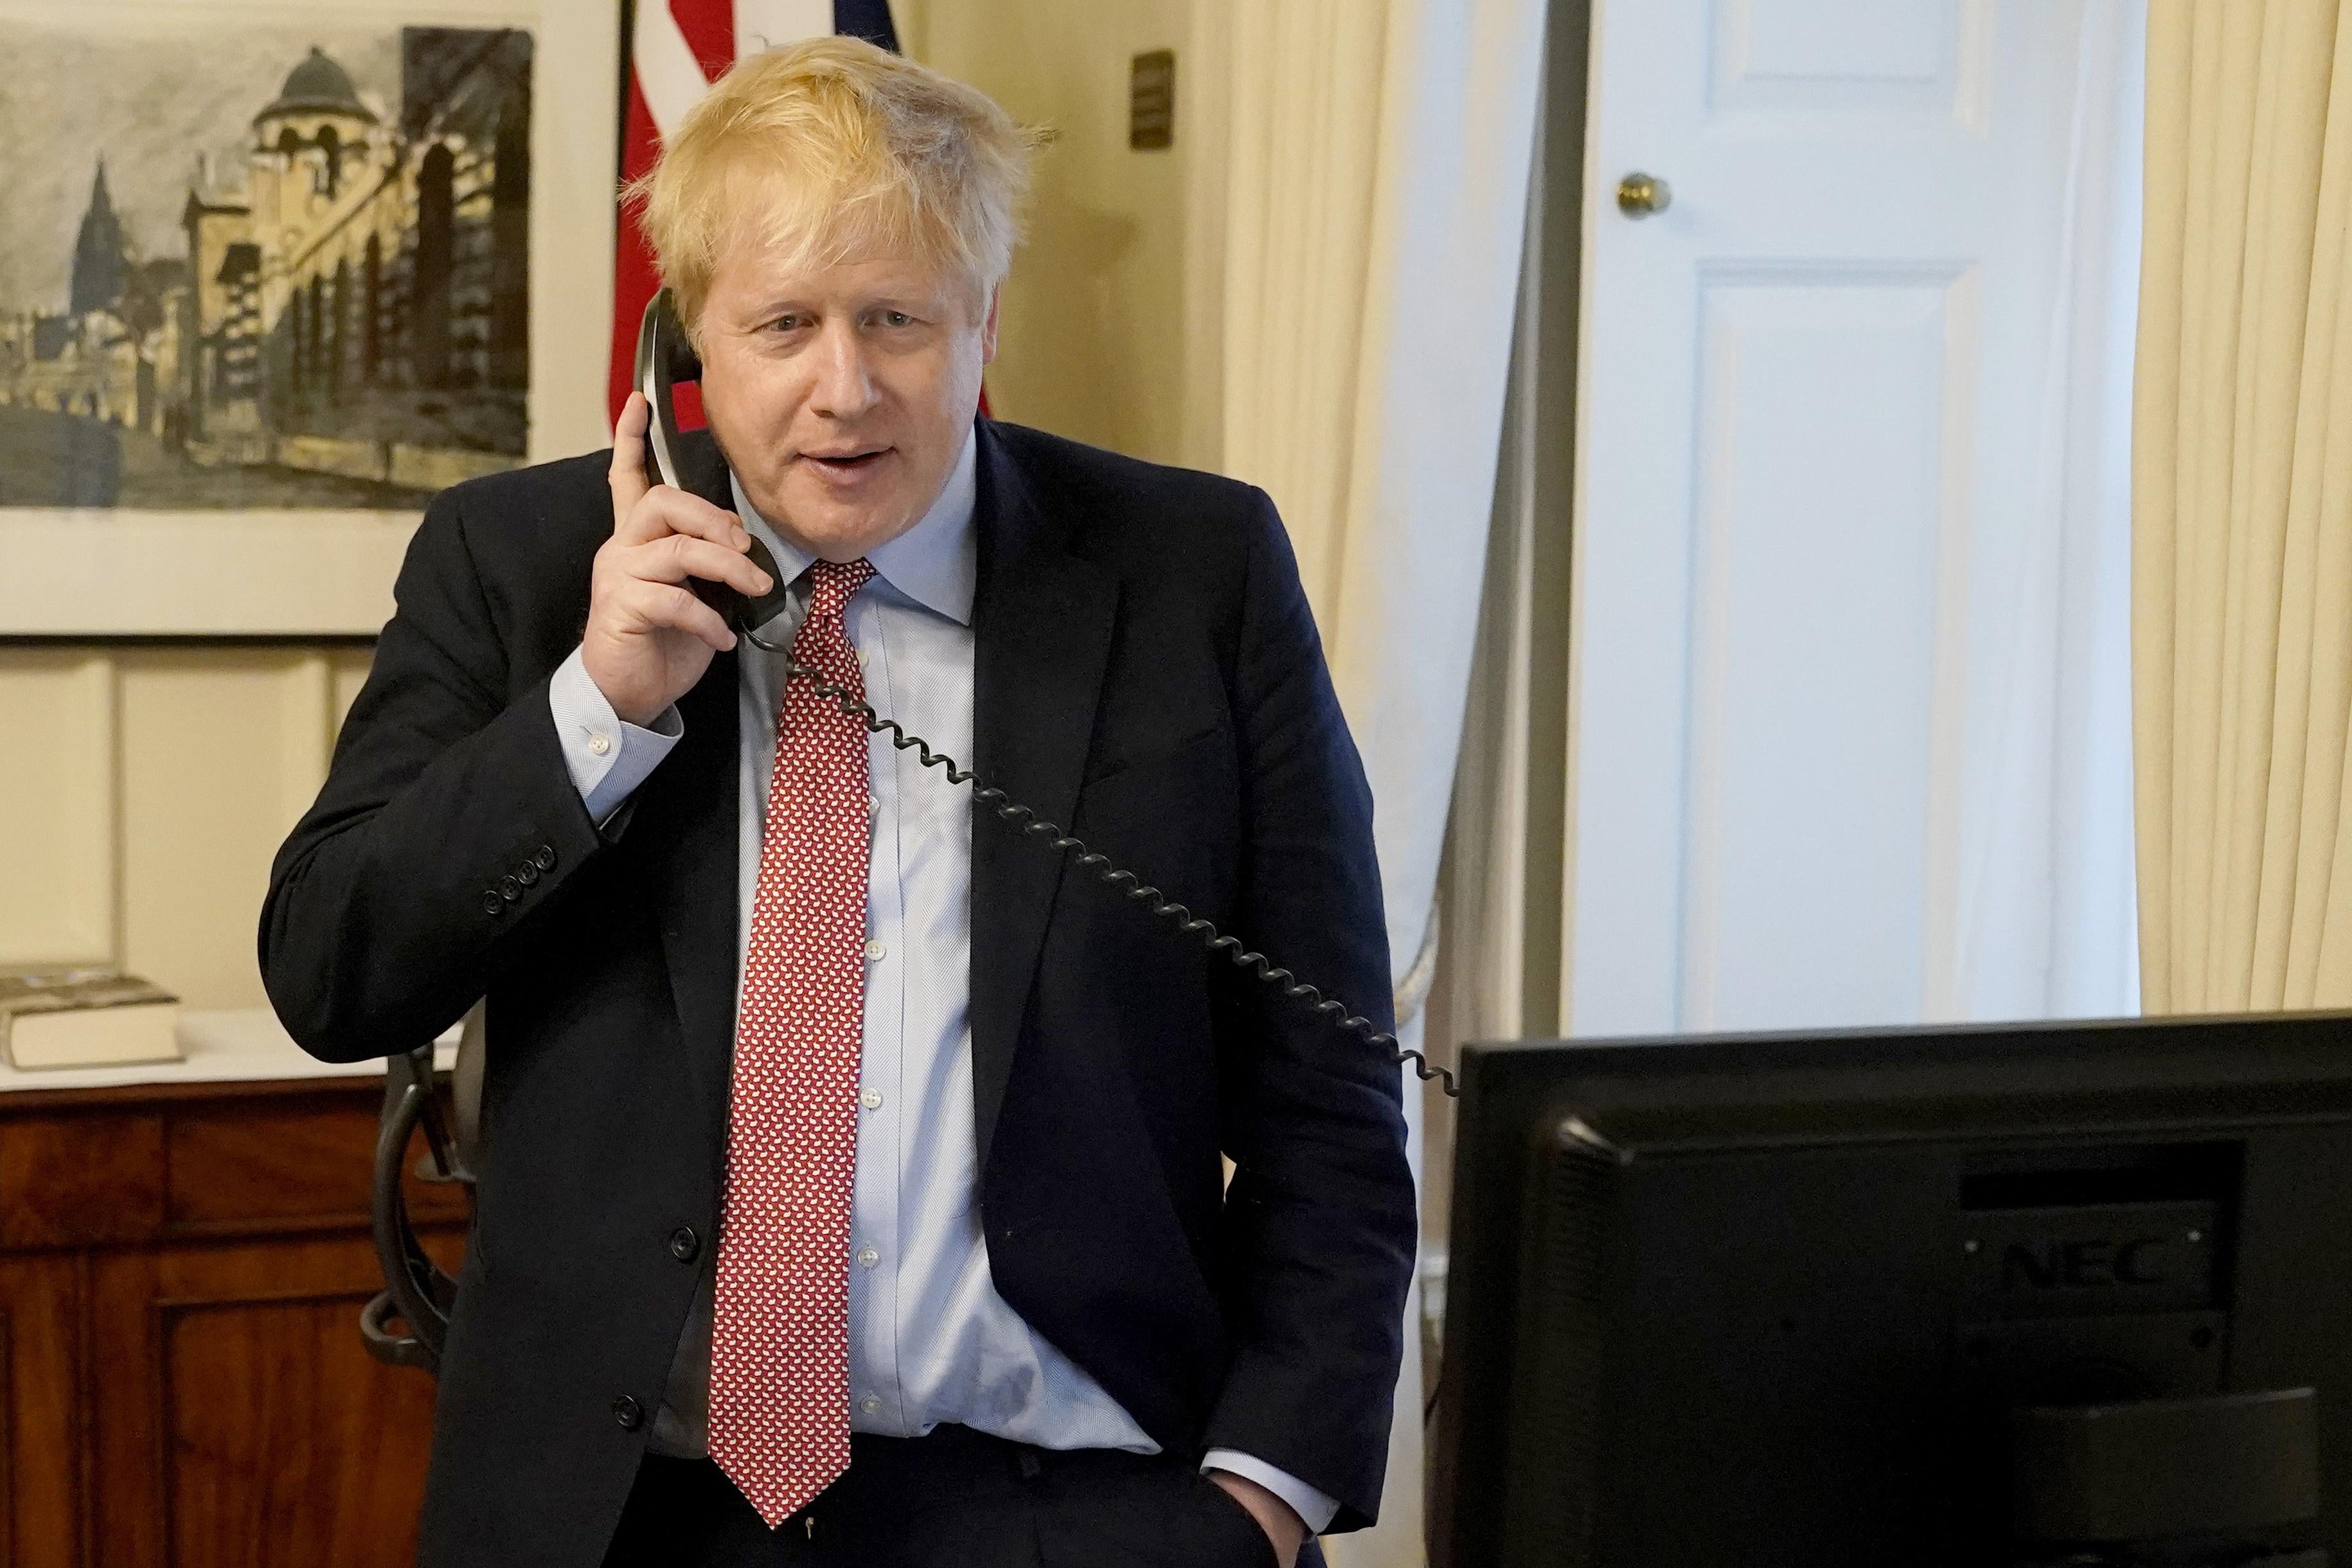 Boris Johnson holds a corded phone up to his ear.